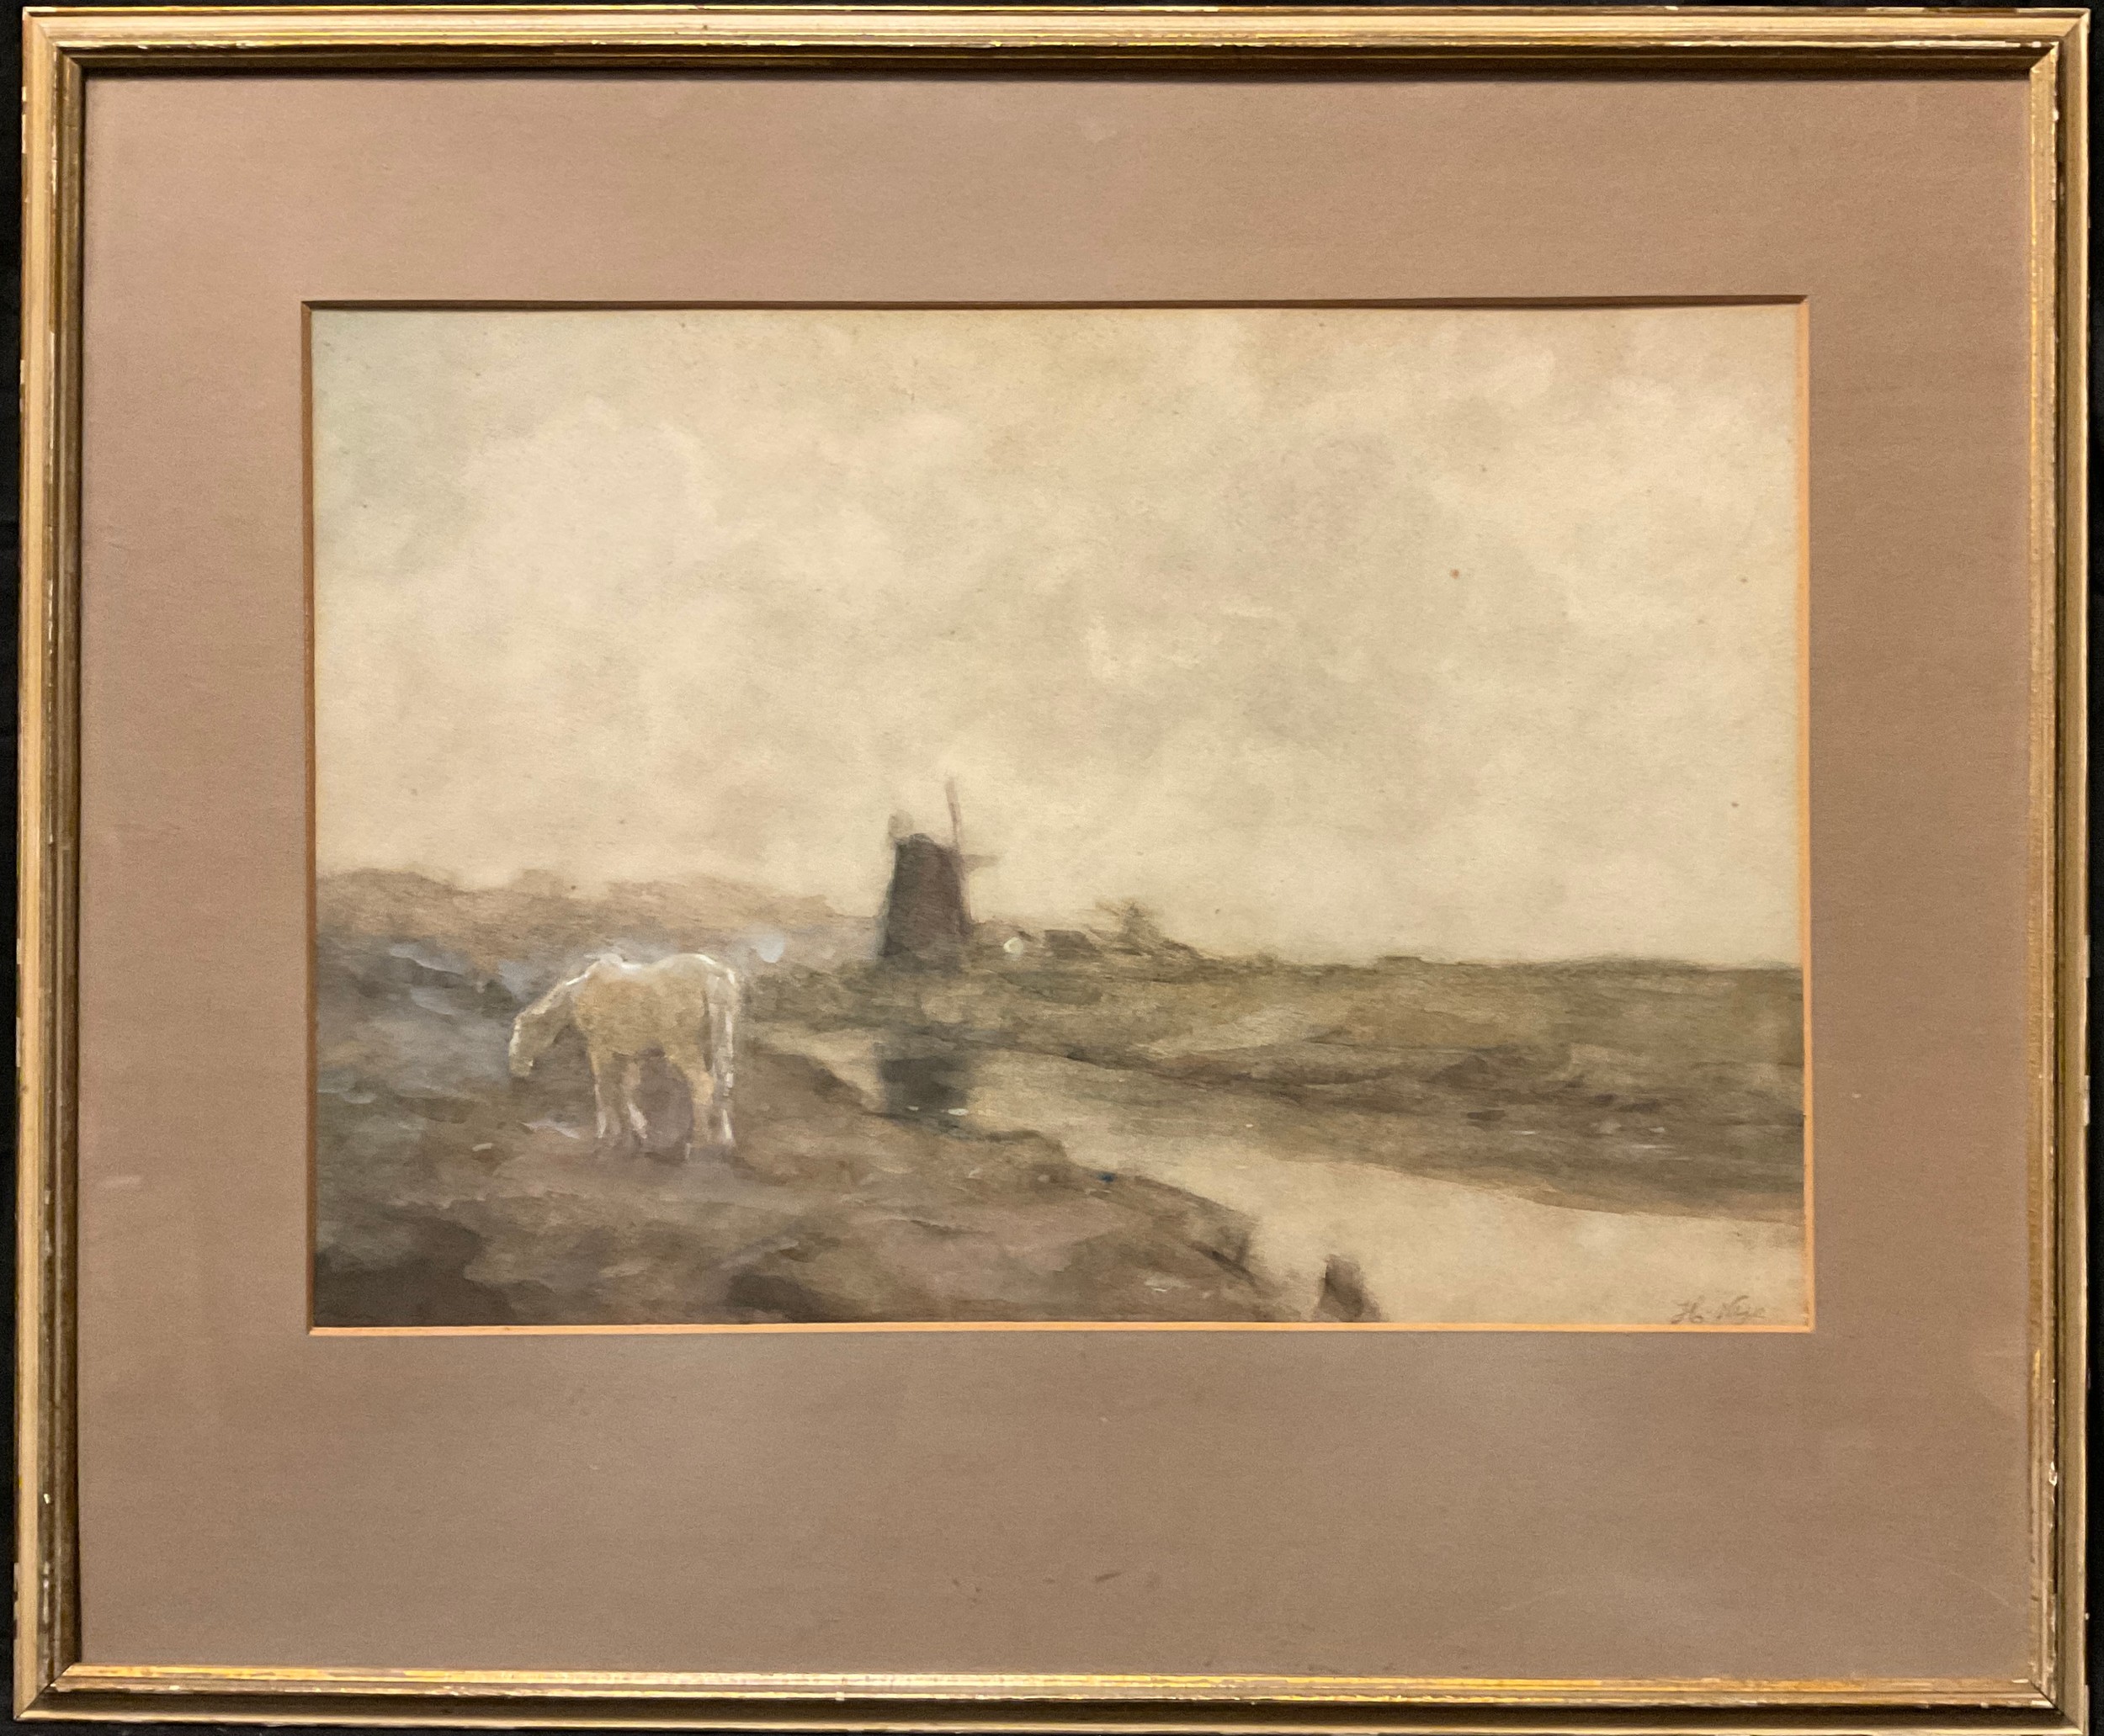 Herbert Nye (fl. 1885-1927), Windmill and a White Horse, signed, watercolour, 32cm x 47cm.